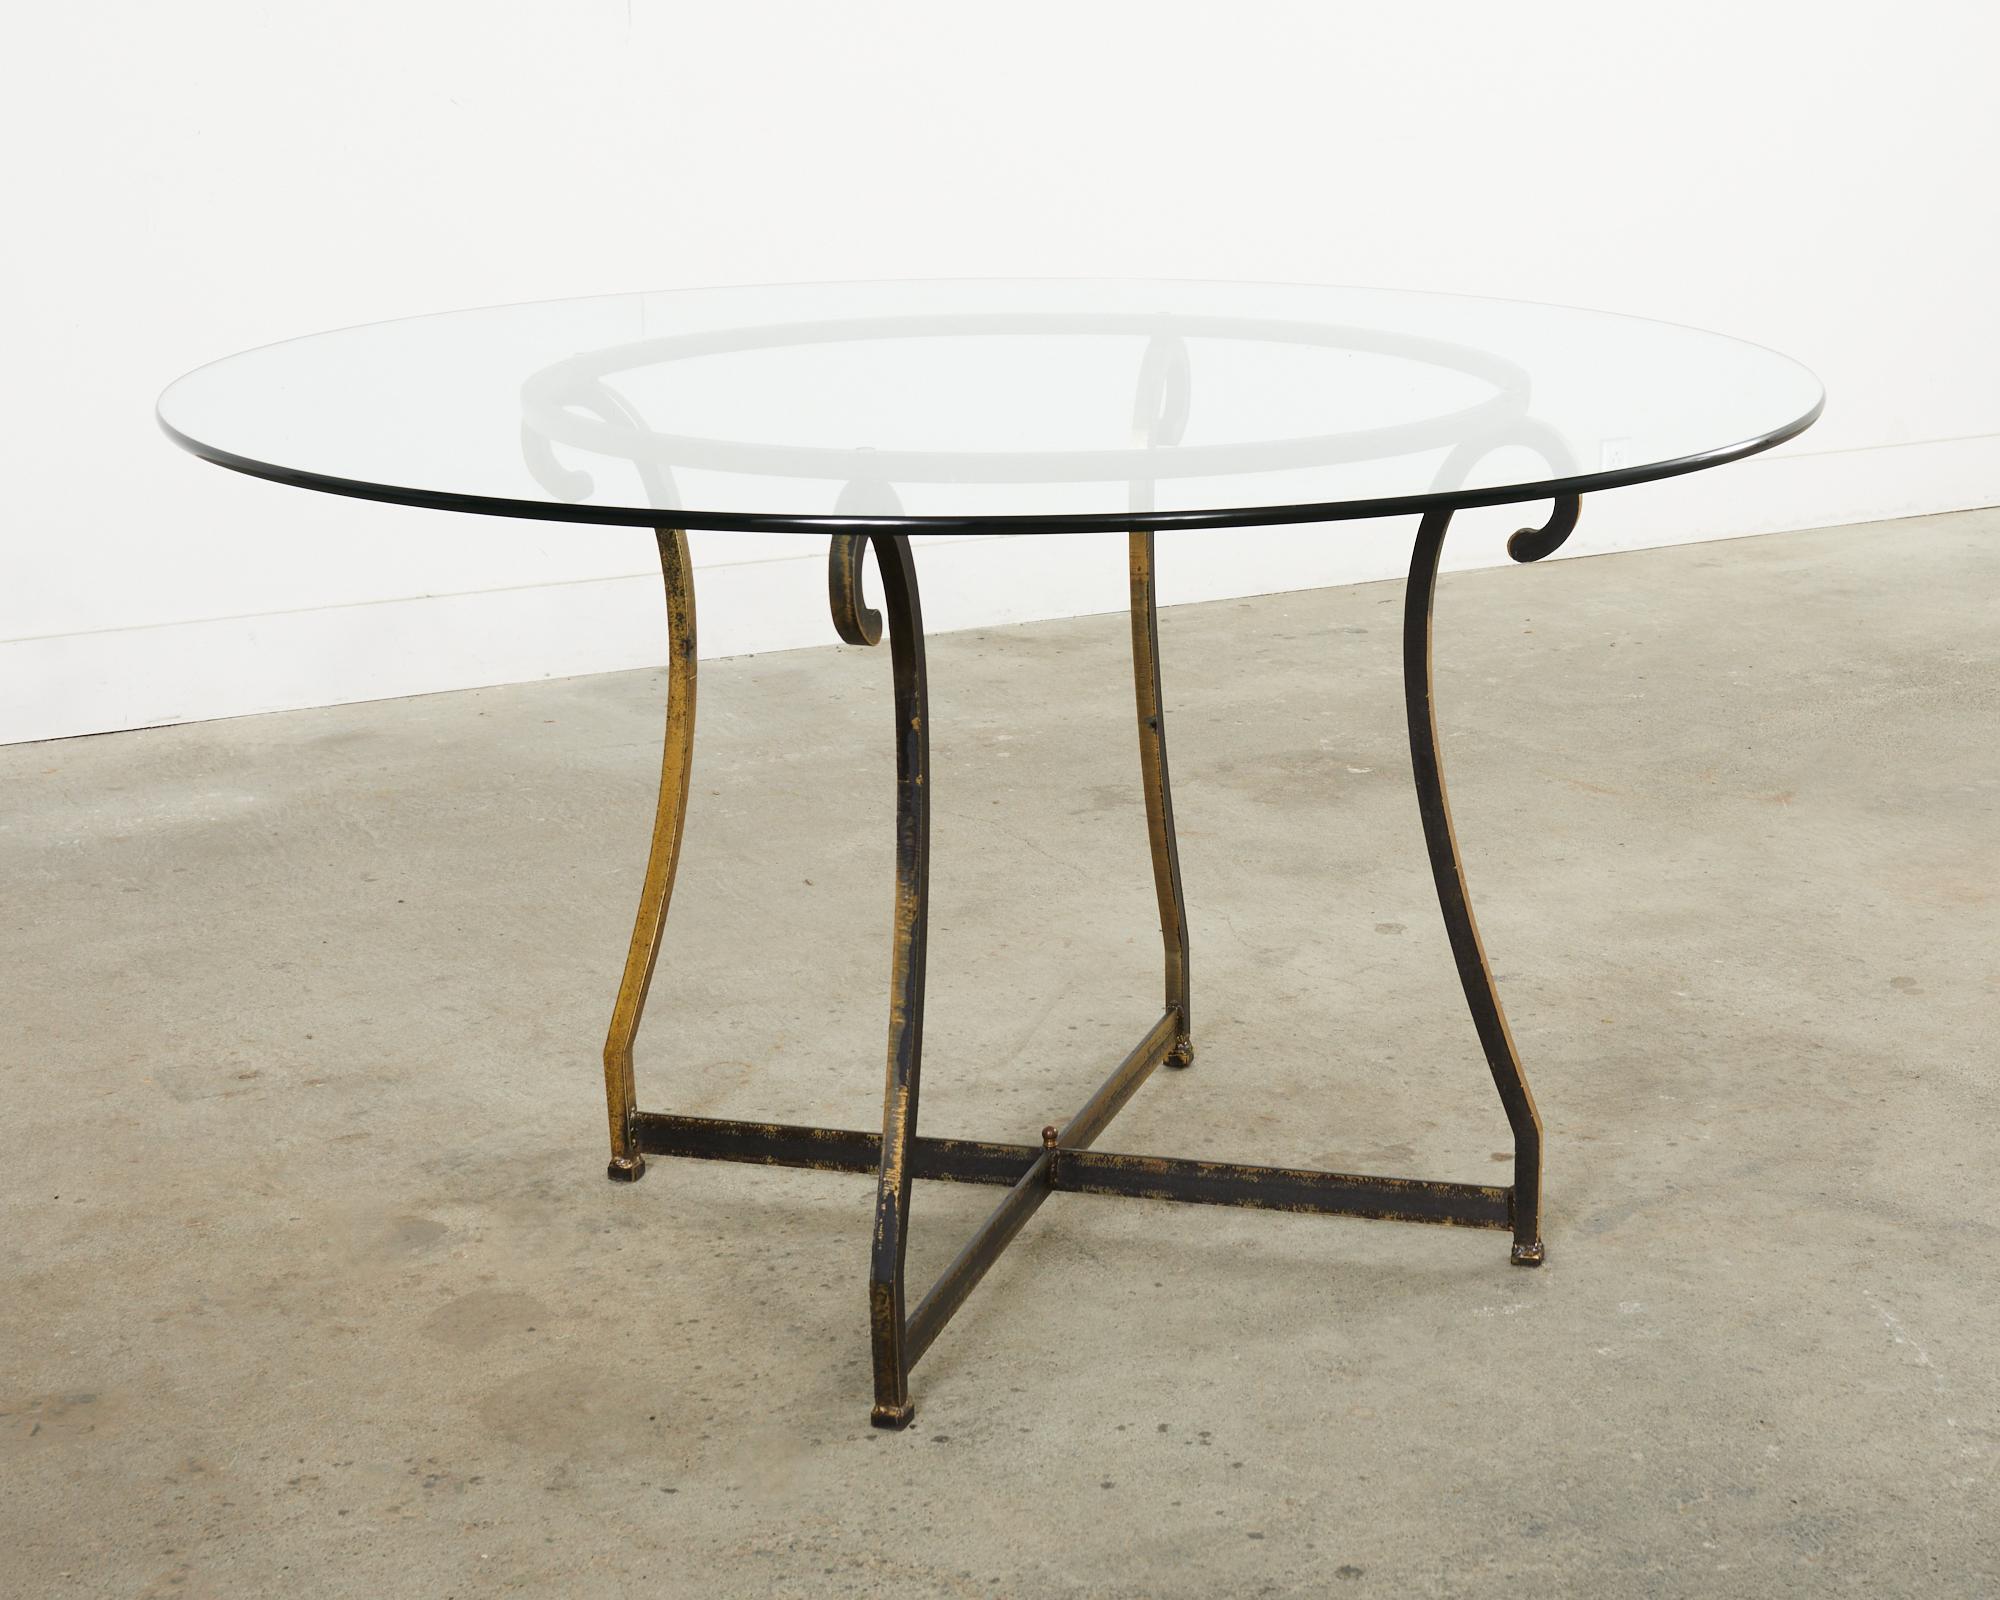 French Bronzed Iron and Glass Scrolled Garden Dining Table 1